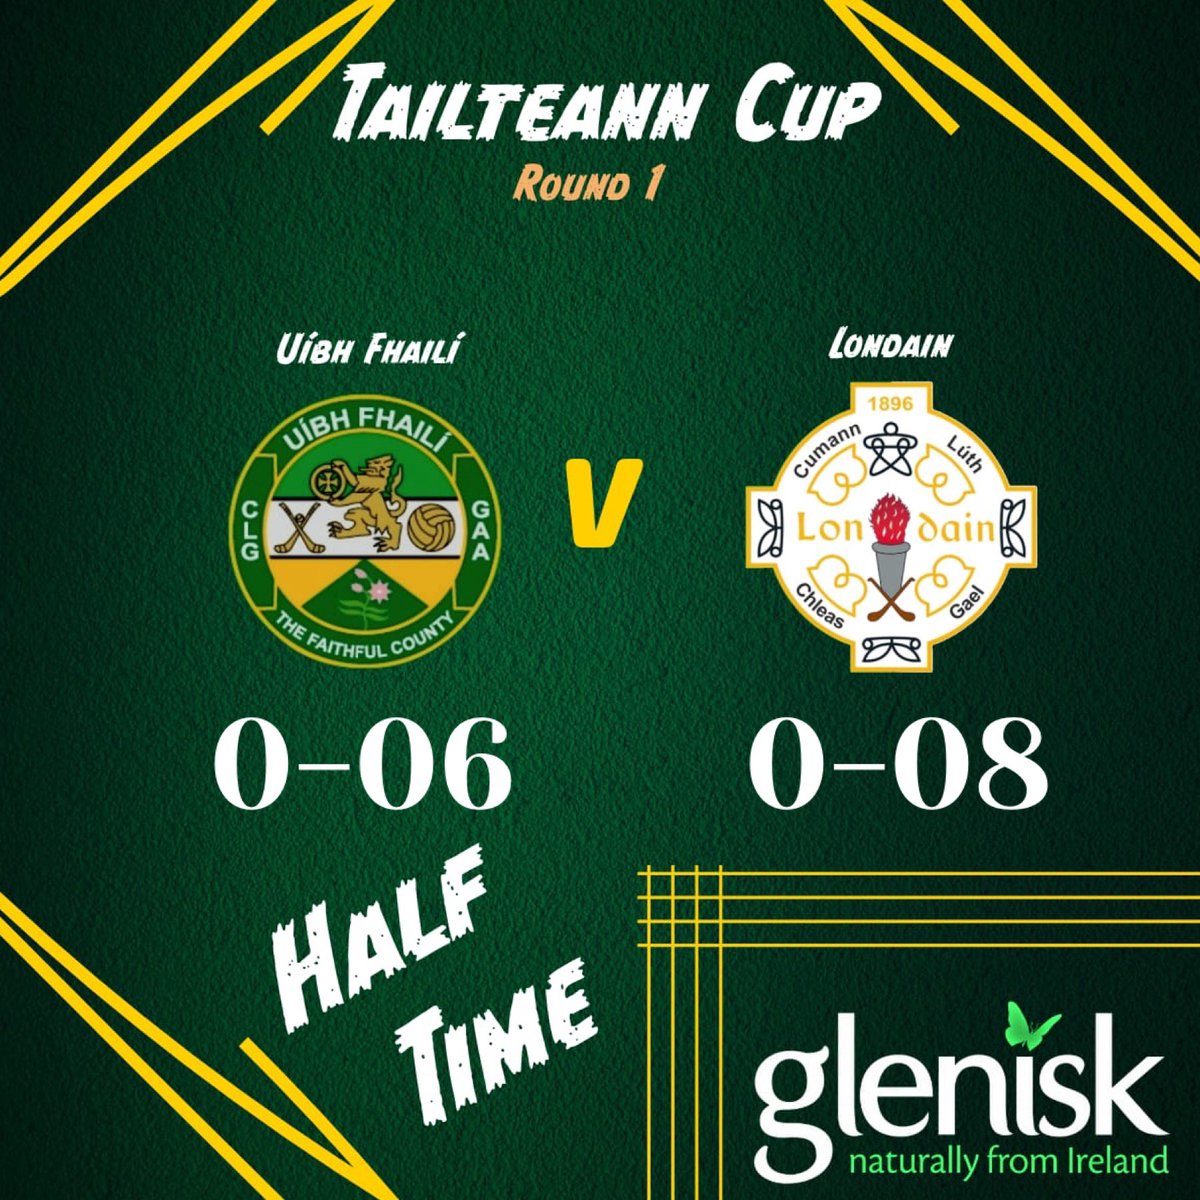 Half Time Here In Tullamore.